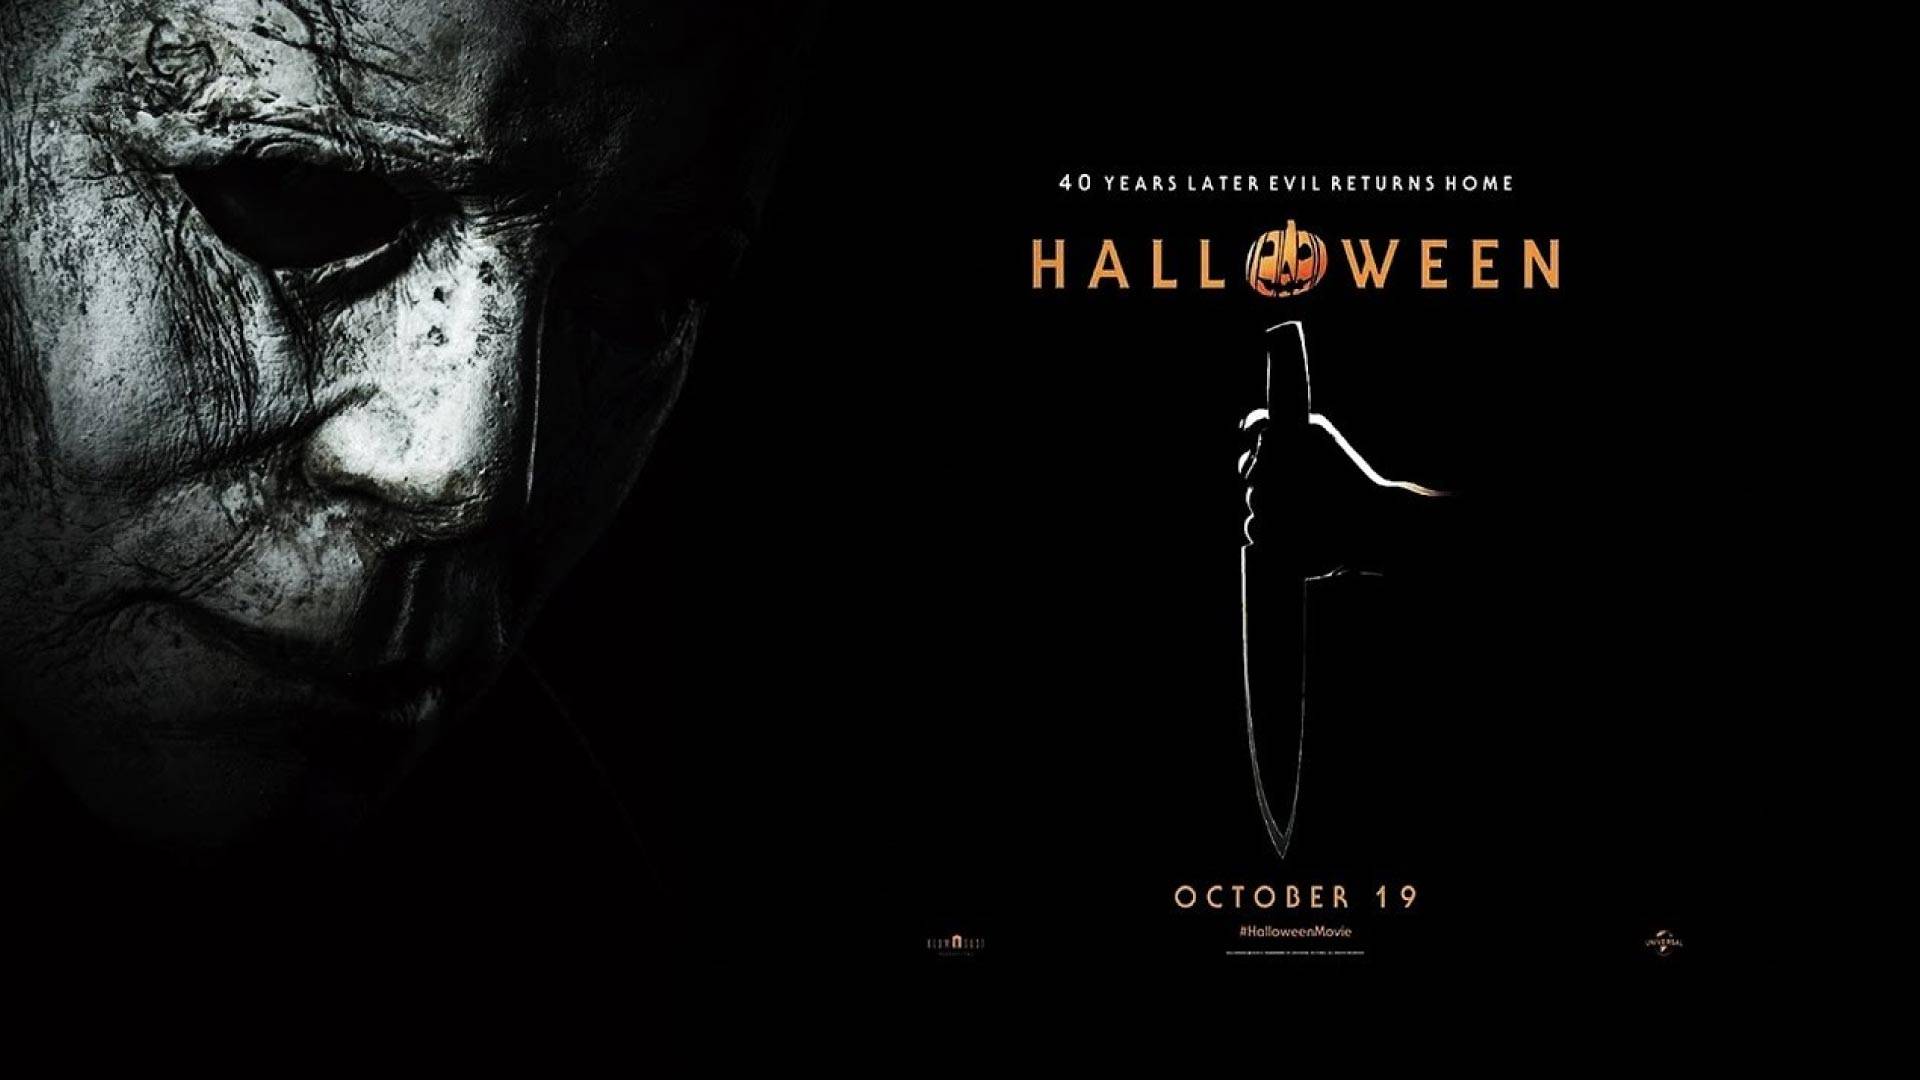 Halloween 2018 cinemas 19th Oct, just in time for HALLOWEEN